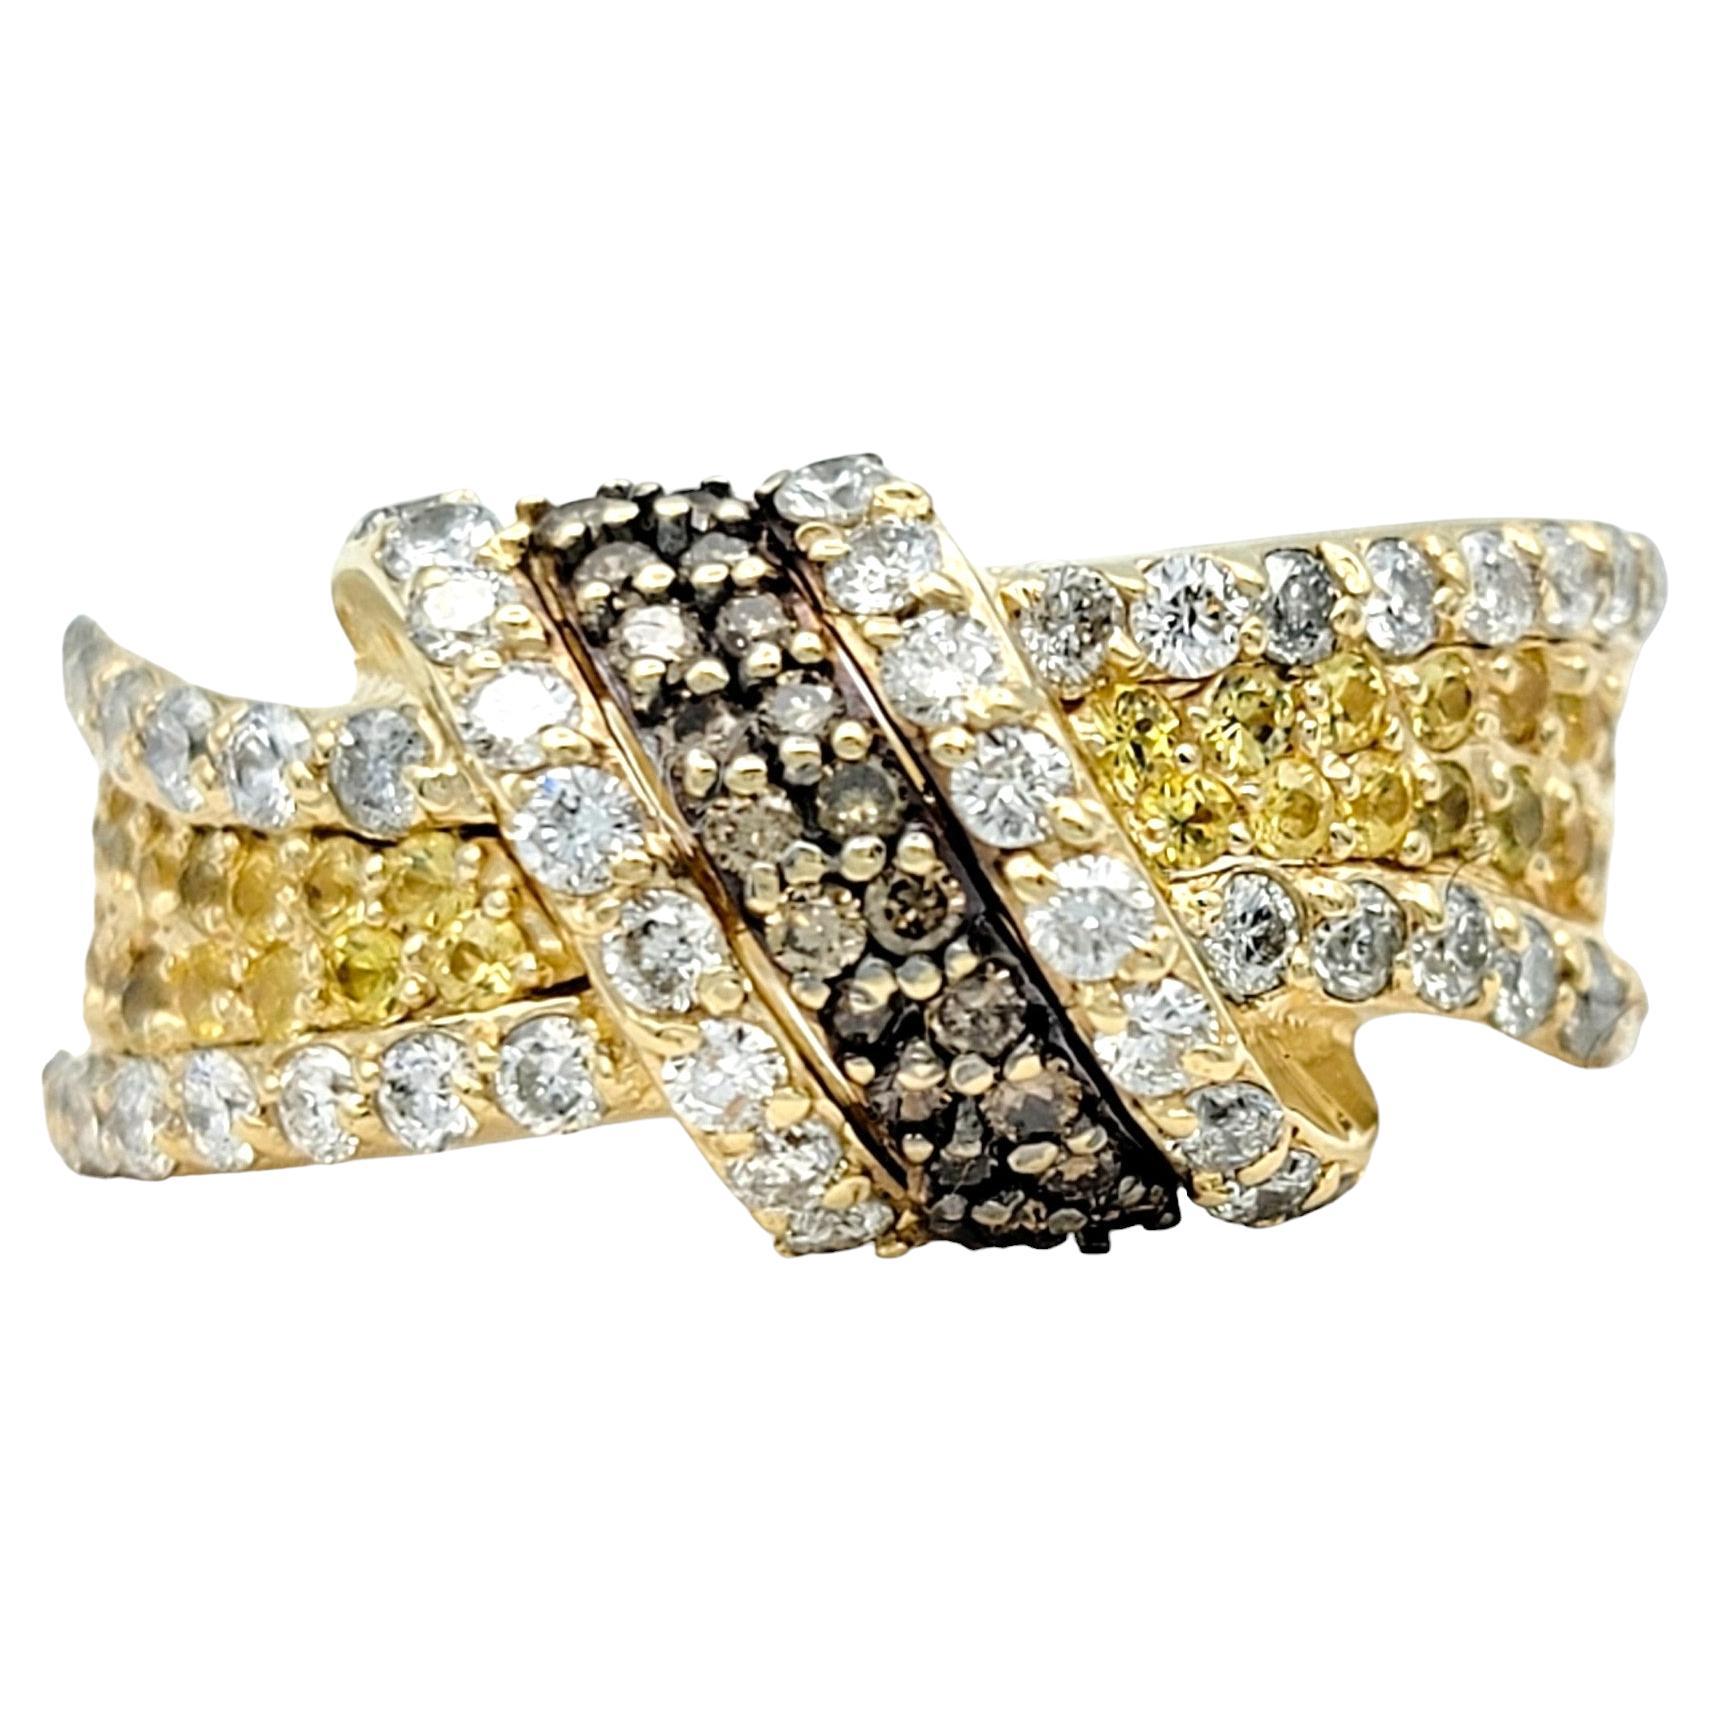 Yellow Sapphire and Pave Diamond Twisted Knot Band Ring in 14 Karat Yellow Gold